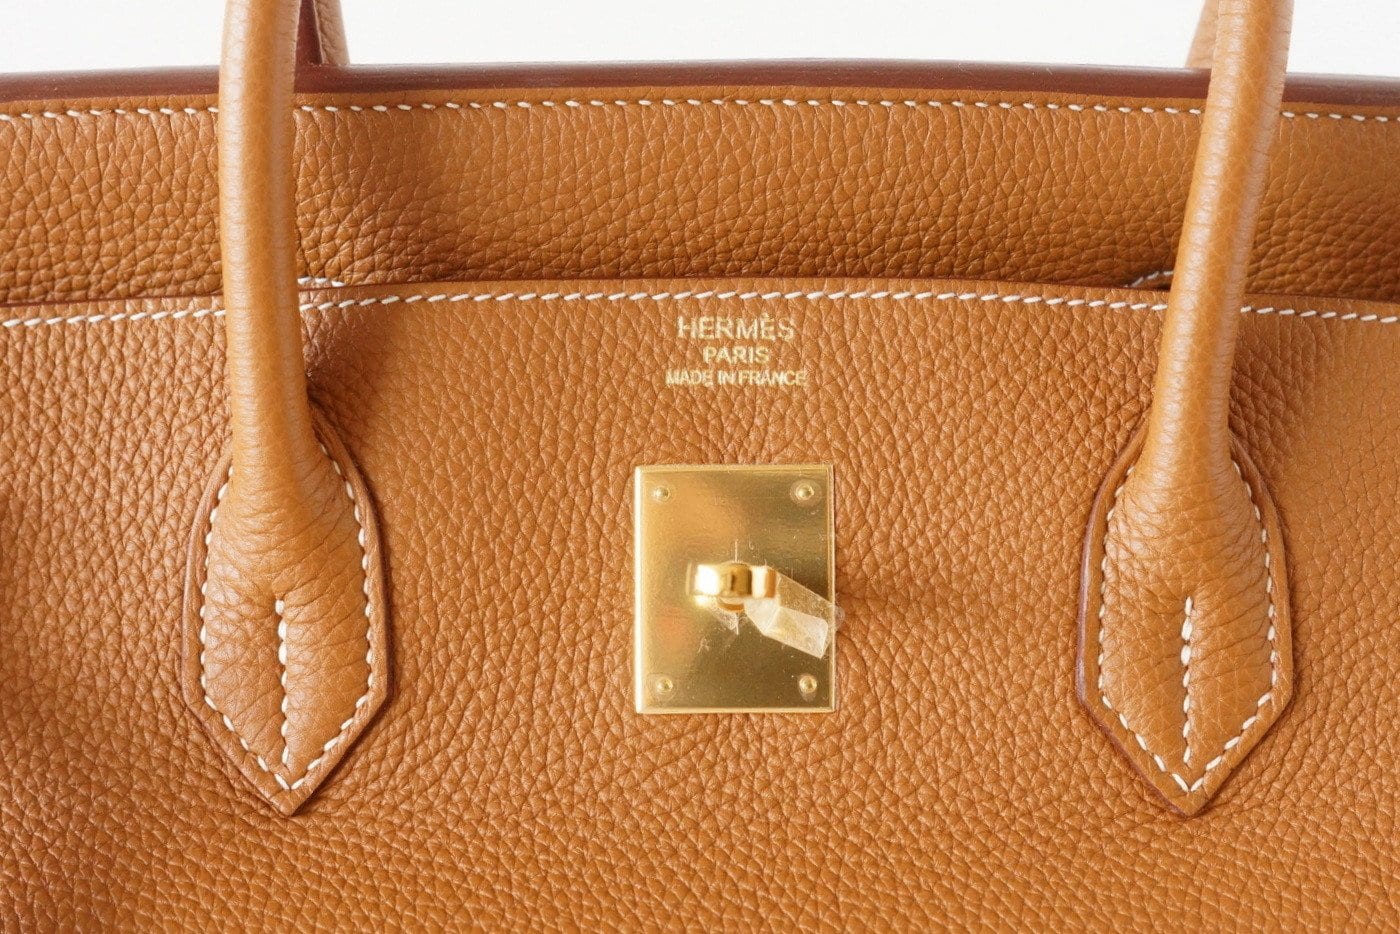 Hermes Birkin 40 Bag Coveted Gold Togo Coveted Gold Hardware - mightychic